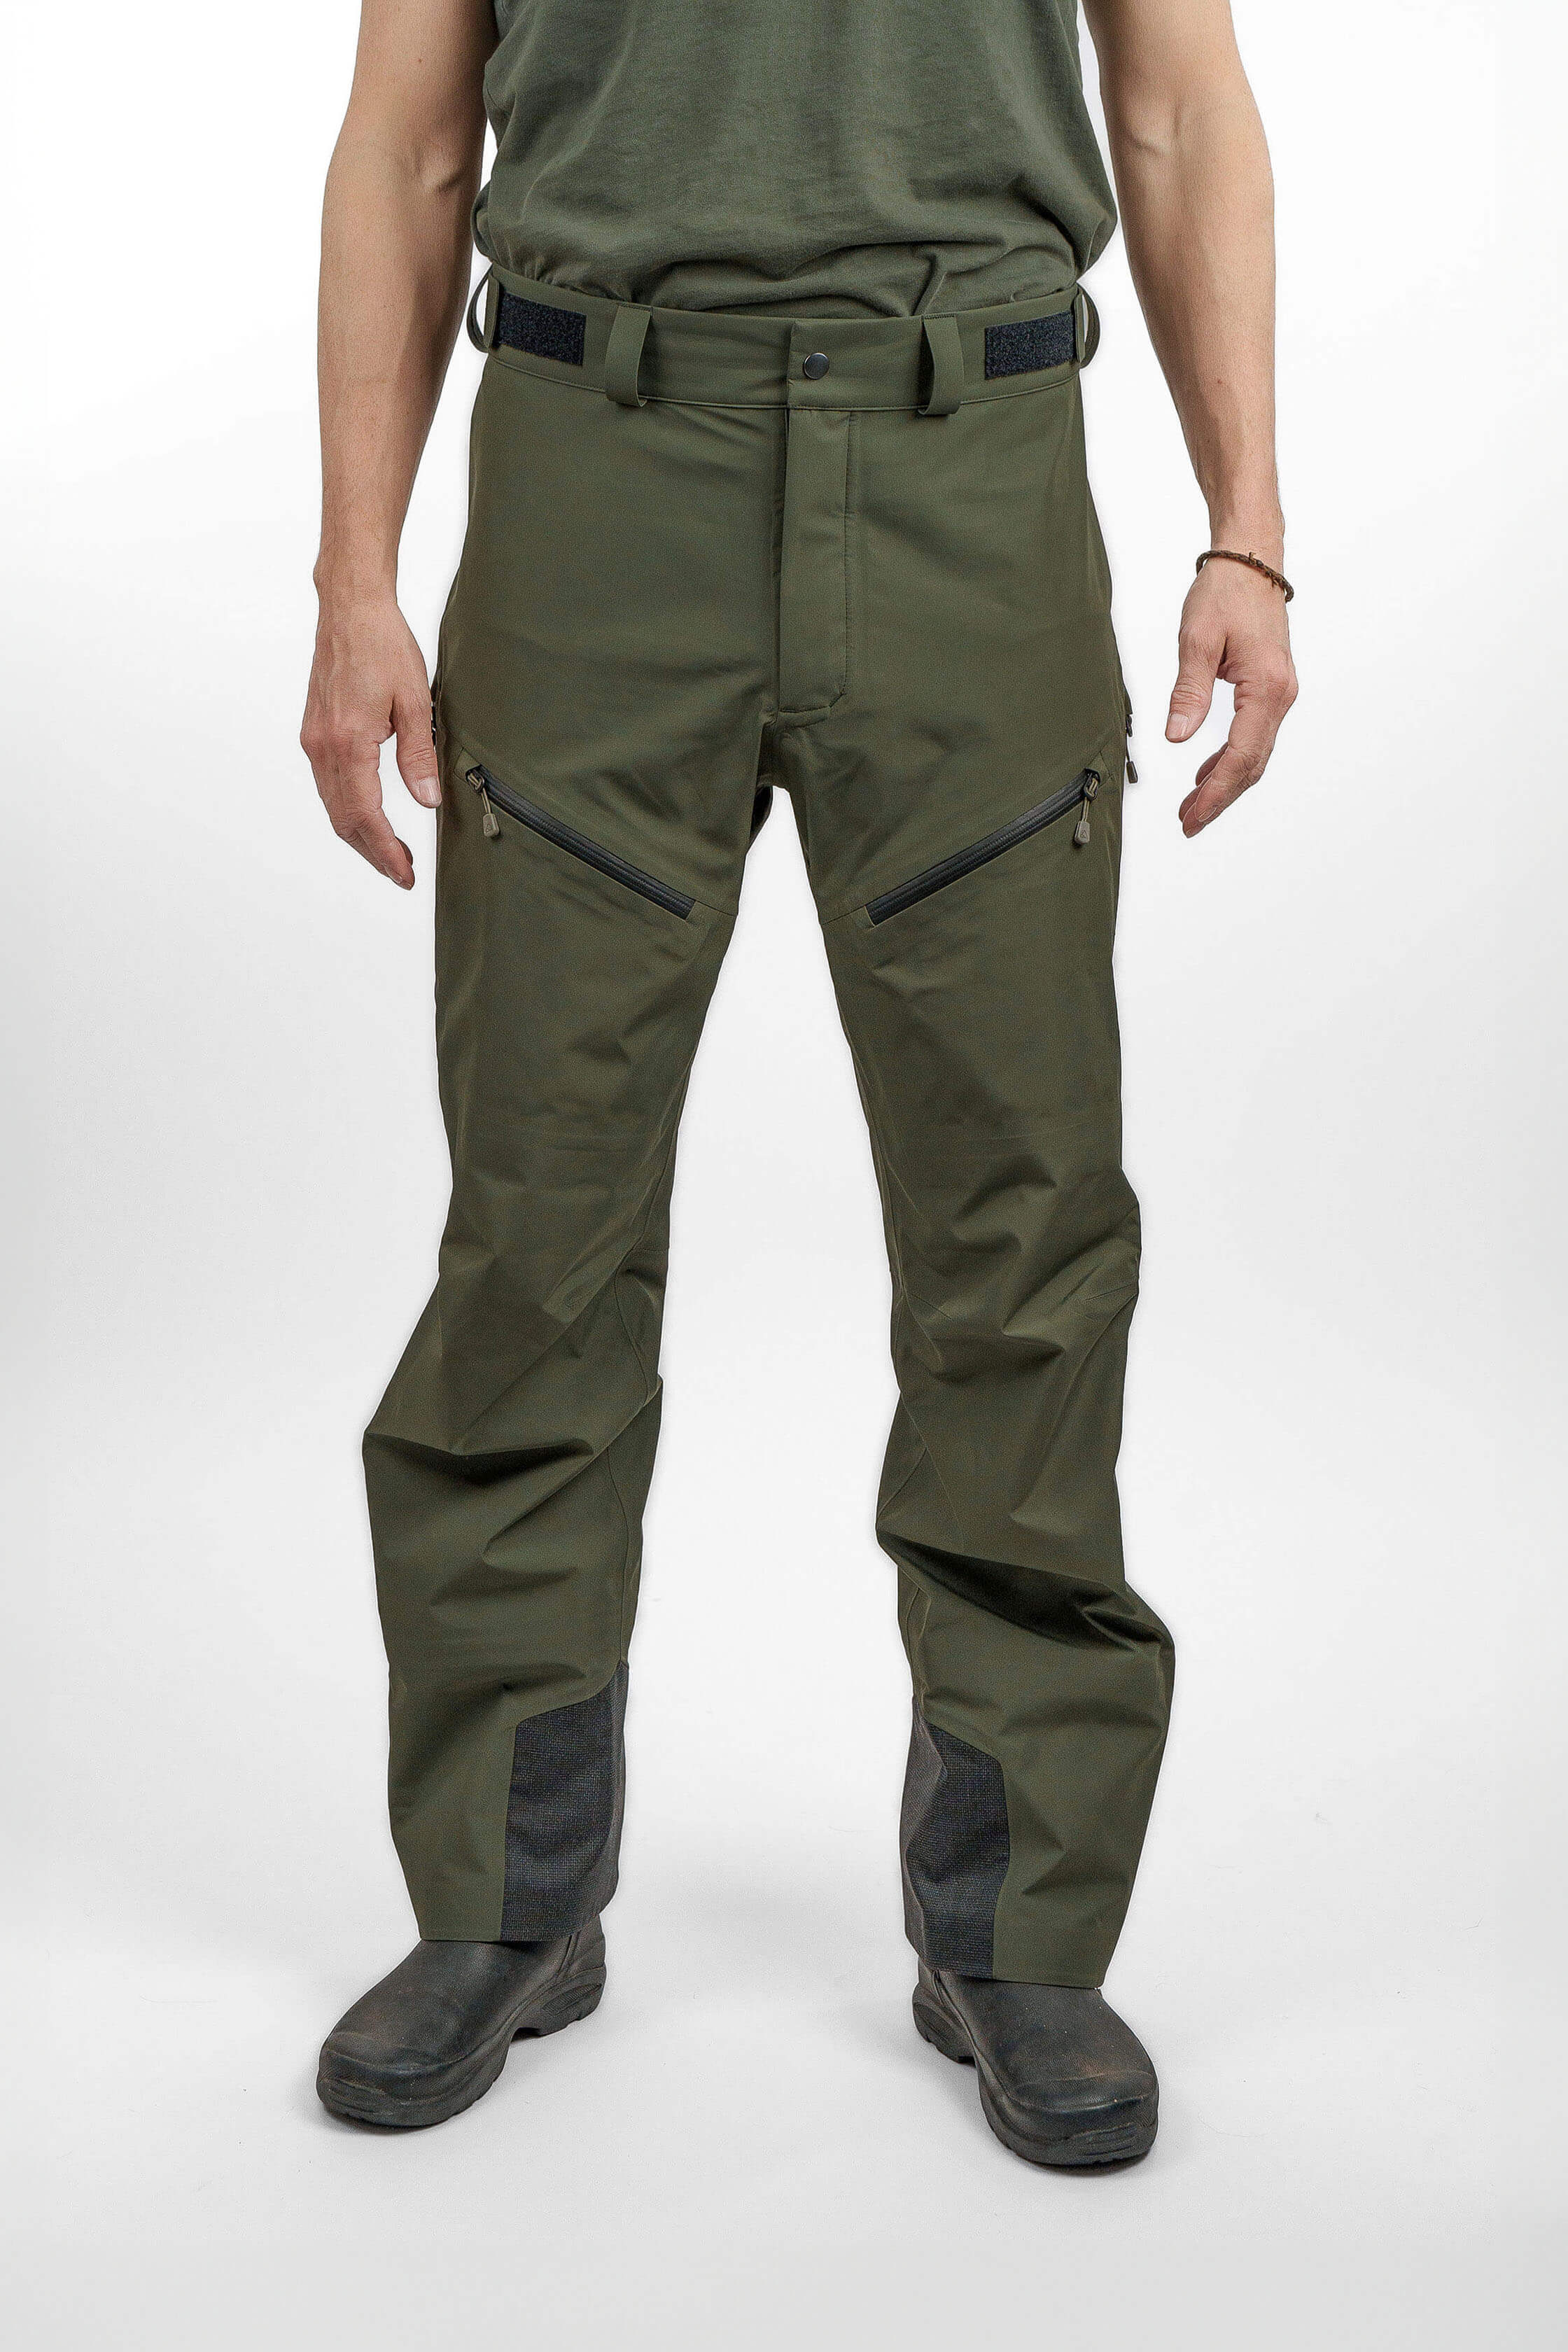 Green hardshell pants in unisex sizing - front view of the Arctic Legacy Nuka Elements 3 layer Pants#color_dusty-olive